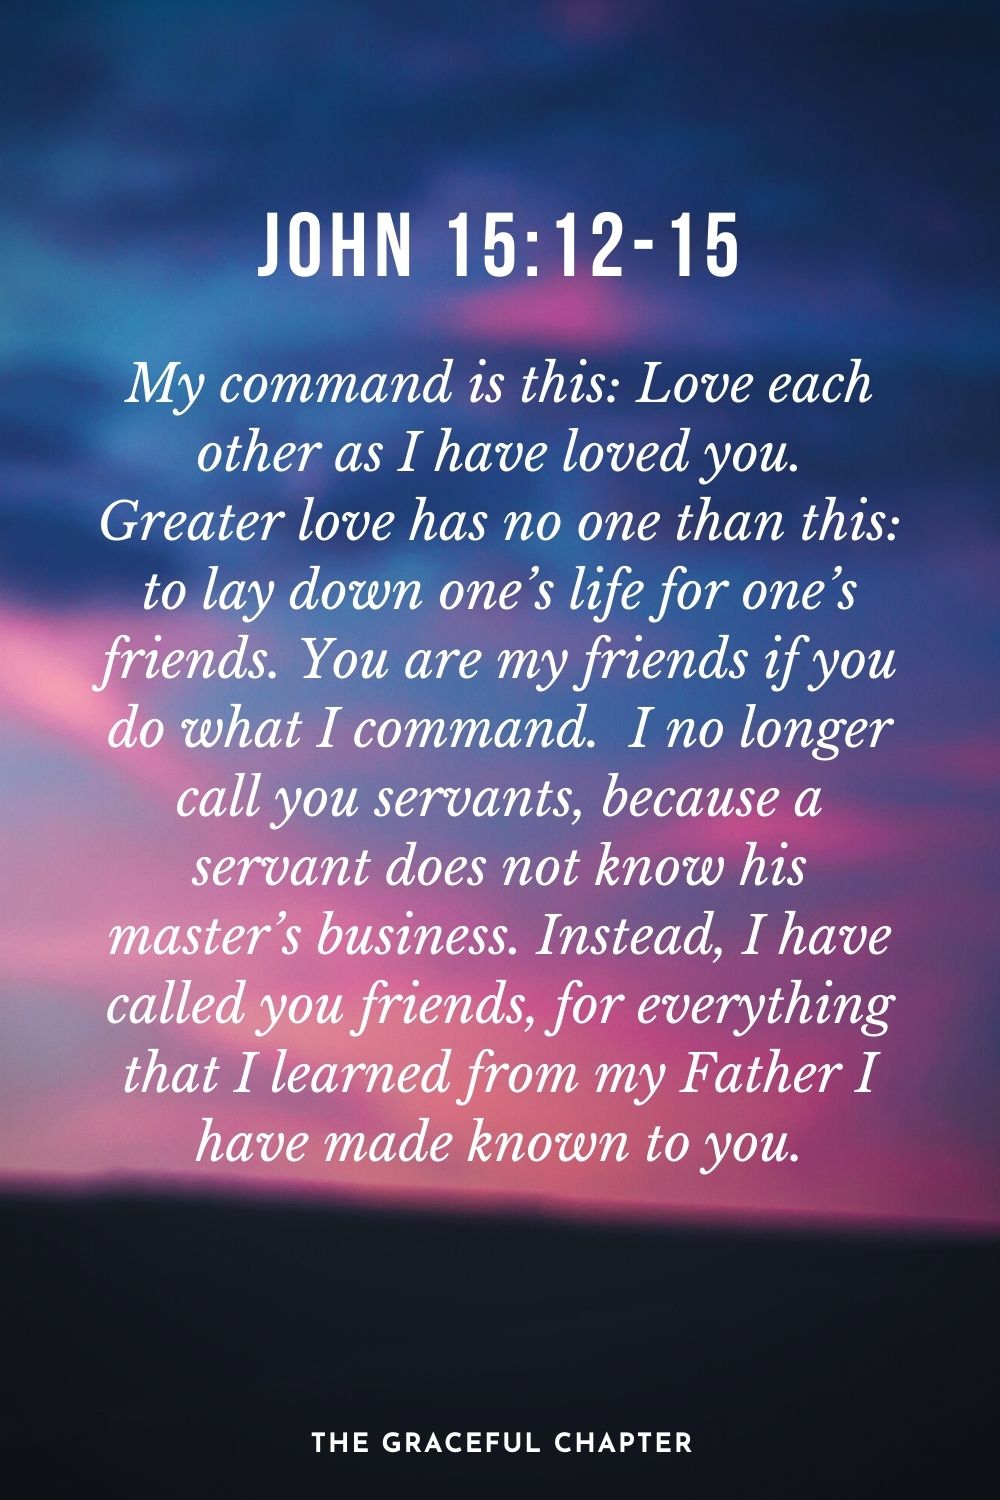 My command is this: Love each other as I have loved you. Greater love has no one than this: to lay down one’s life for one’s friends. You are my friends if you do what I command.  I no longer call you servants, because a servant does not know his master’s business. Instead, I have called you friends, for everything that I learned from my Father I have made known to you. John 15:12-15